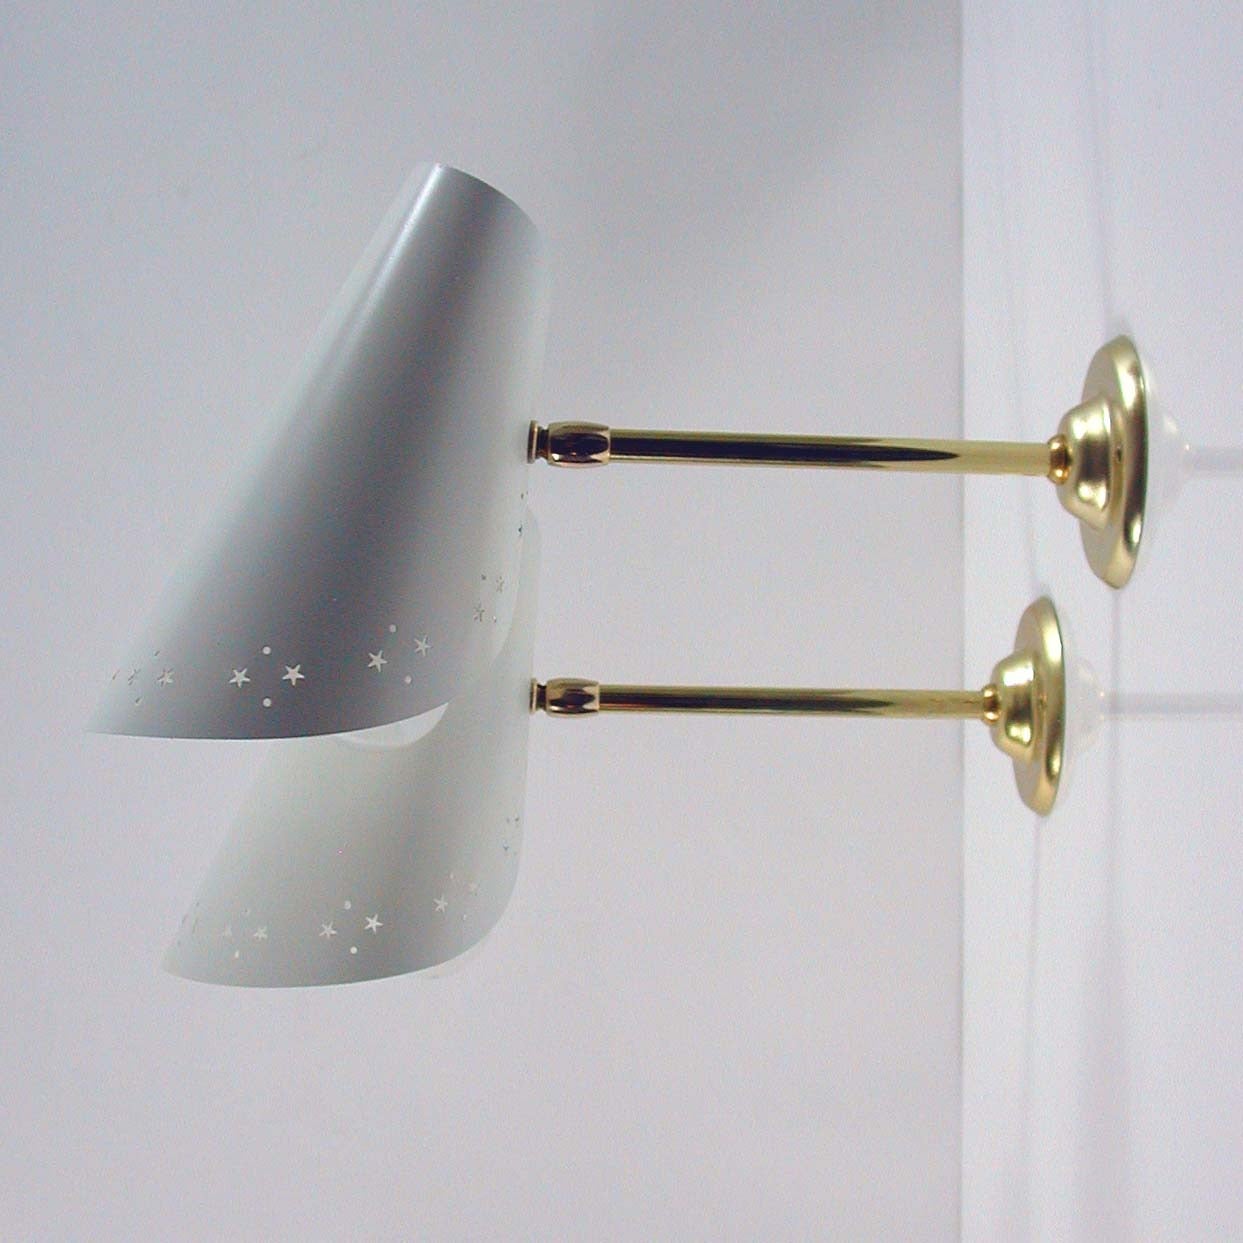 Awesome Mid-Century wall lamps, made in Italy in the 1950s.
The lamps are made of brass and white lacquered metal. The shades are adjustable.

They require a E14 screw on bulb each and work on 110V as well as 220V.